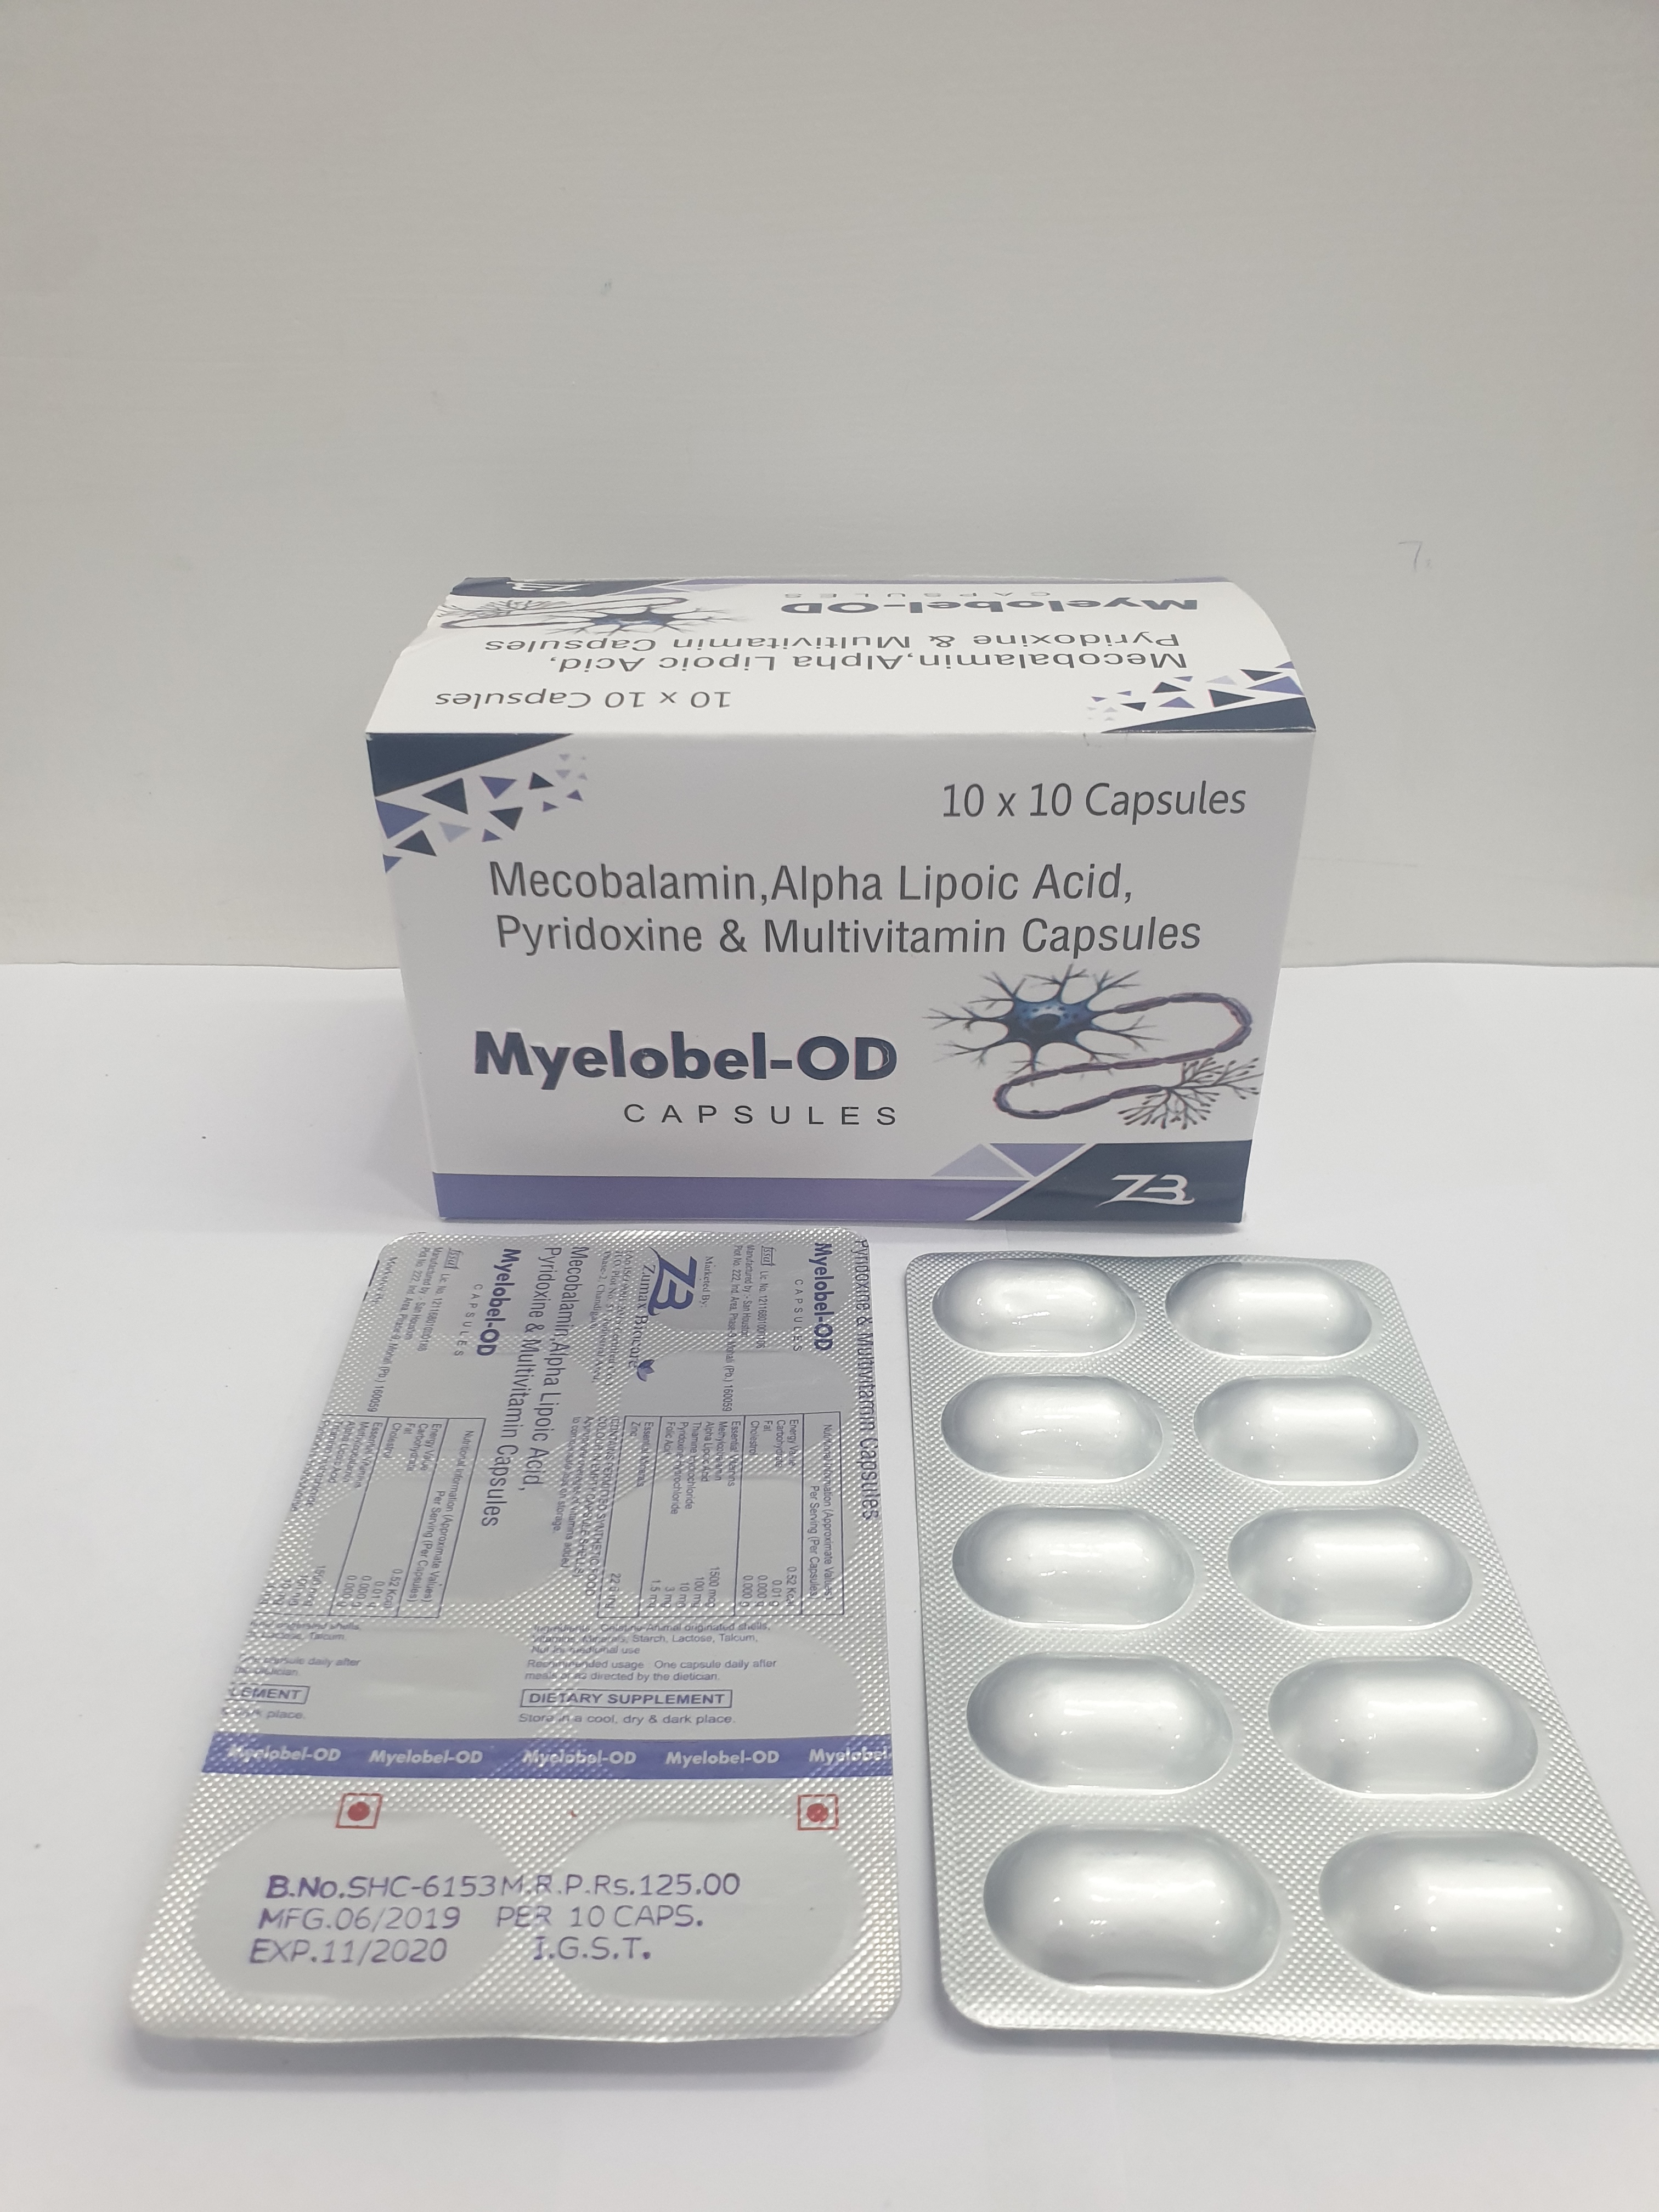 Product Name: Myelobel OD, Compositions of are Mecobalamin, Alpha Lipoi Acid, Pyridoxine & Multivitamin Capsules - Zumax Biocare